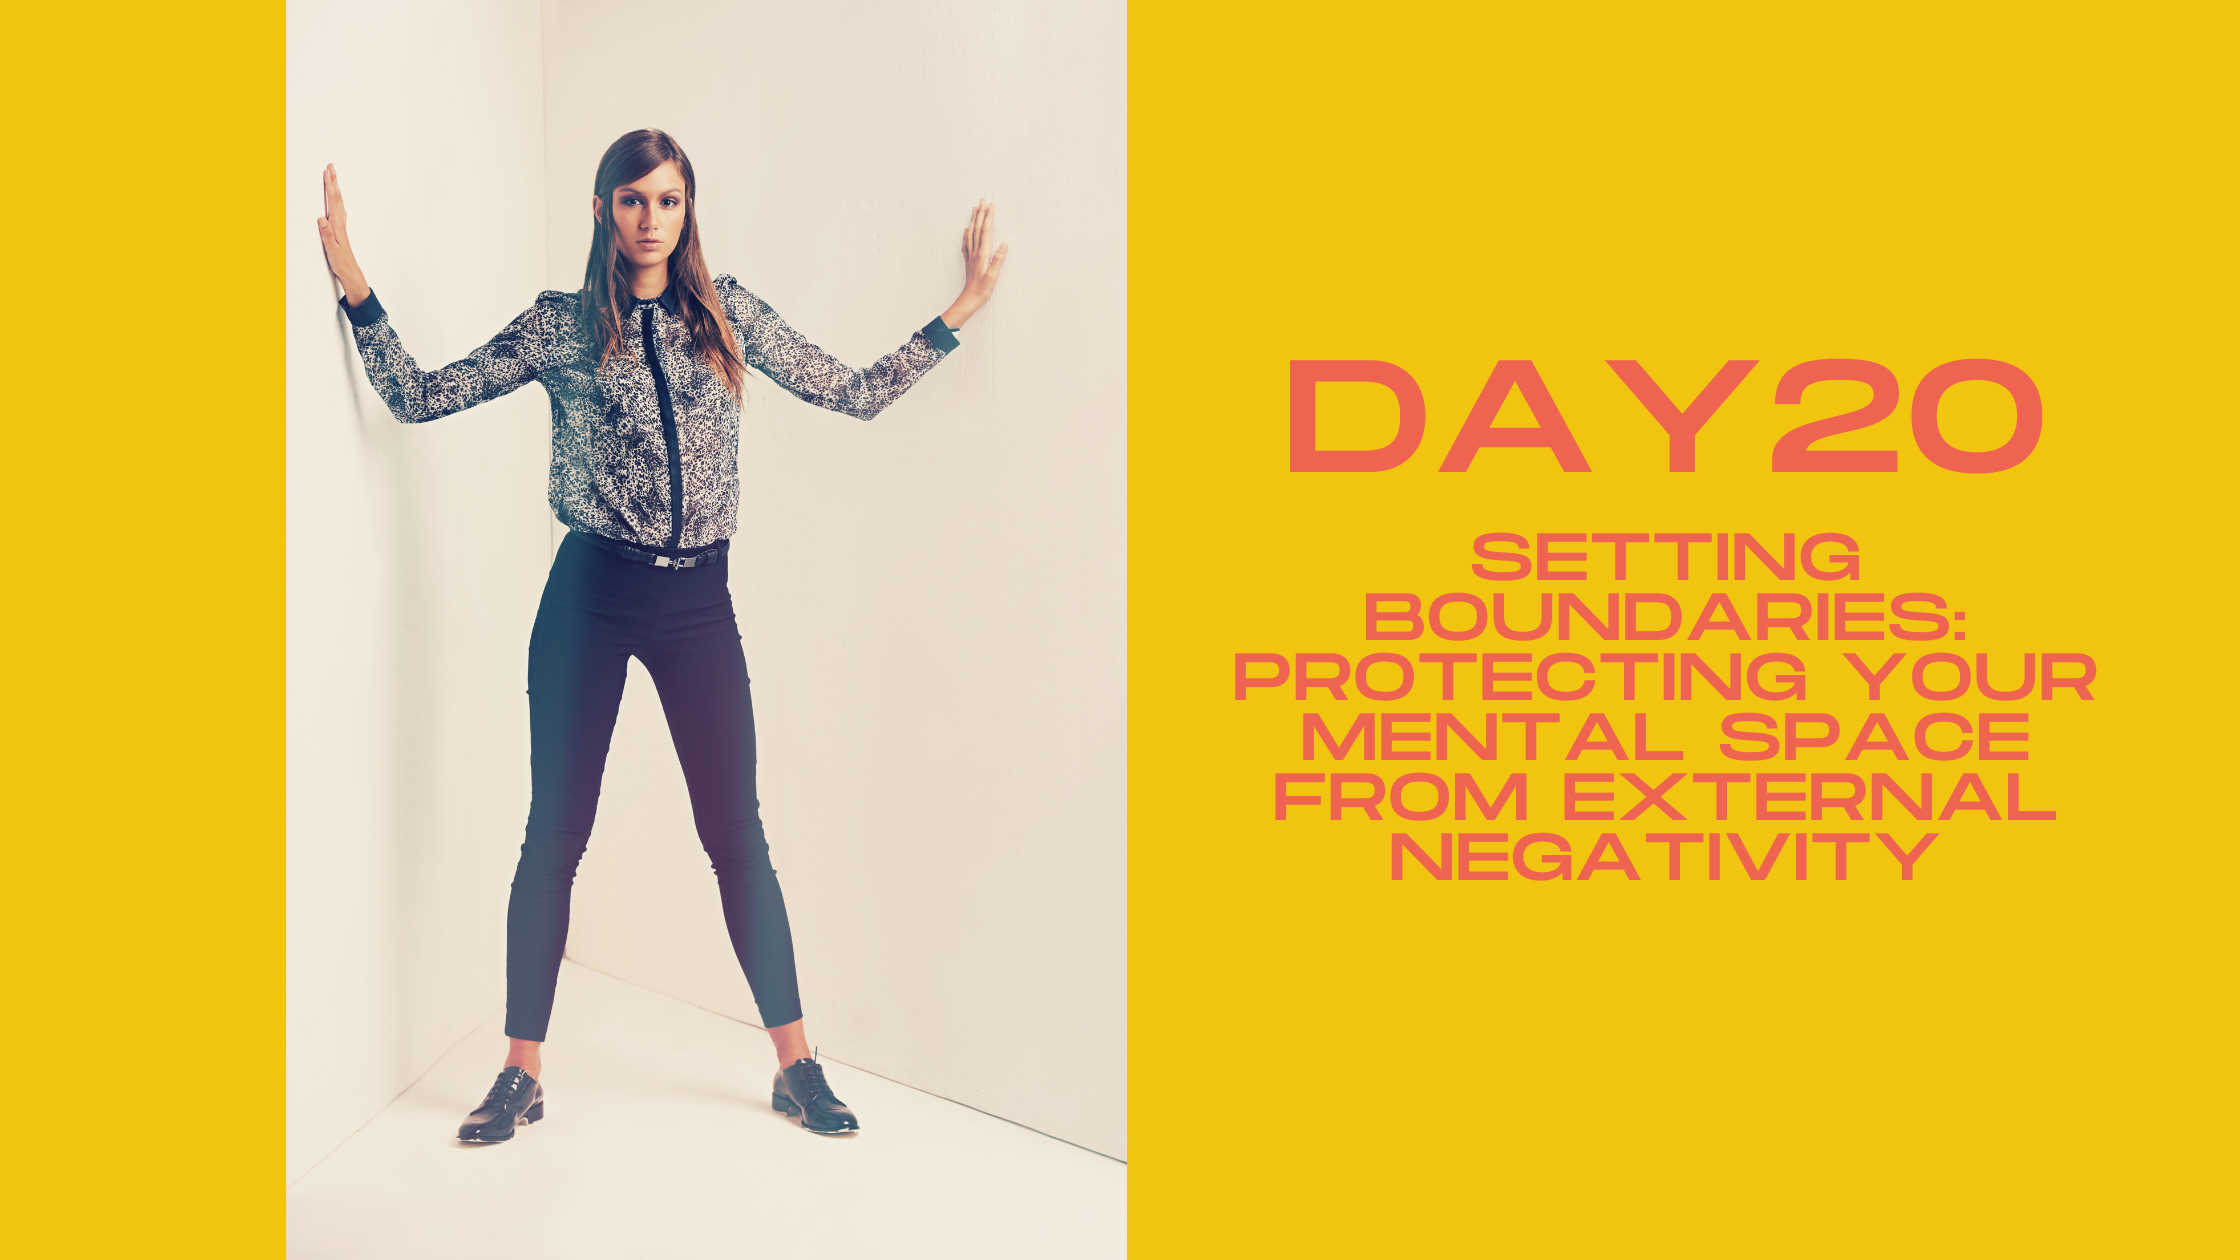 Day 20: Setting Boundaries: Protecting Your Mental Space from External Negativity